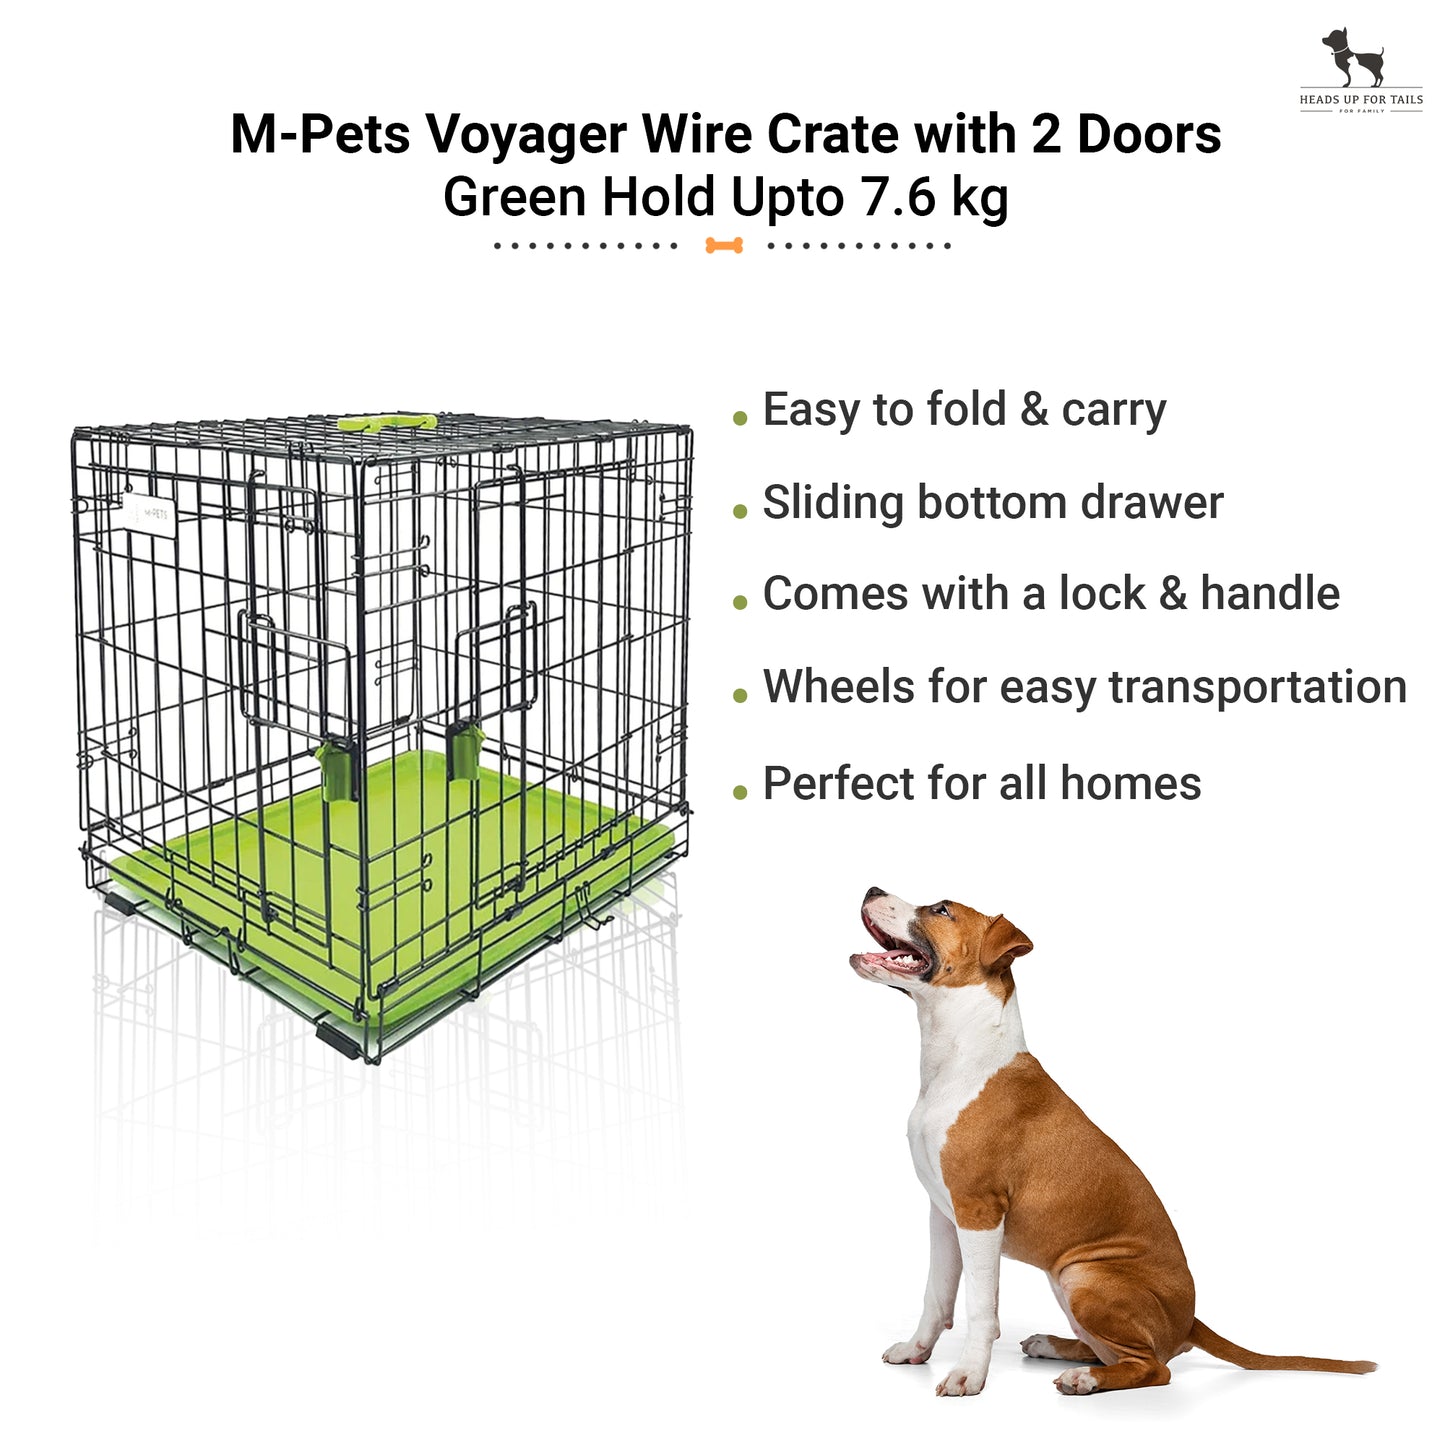 M-Pets Voyager Wire Crate with 2 Doors - Green Hold Upto 7.6 kg - Heads Up For Tails